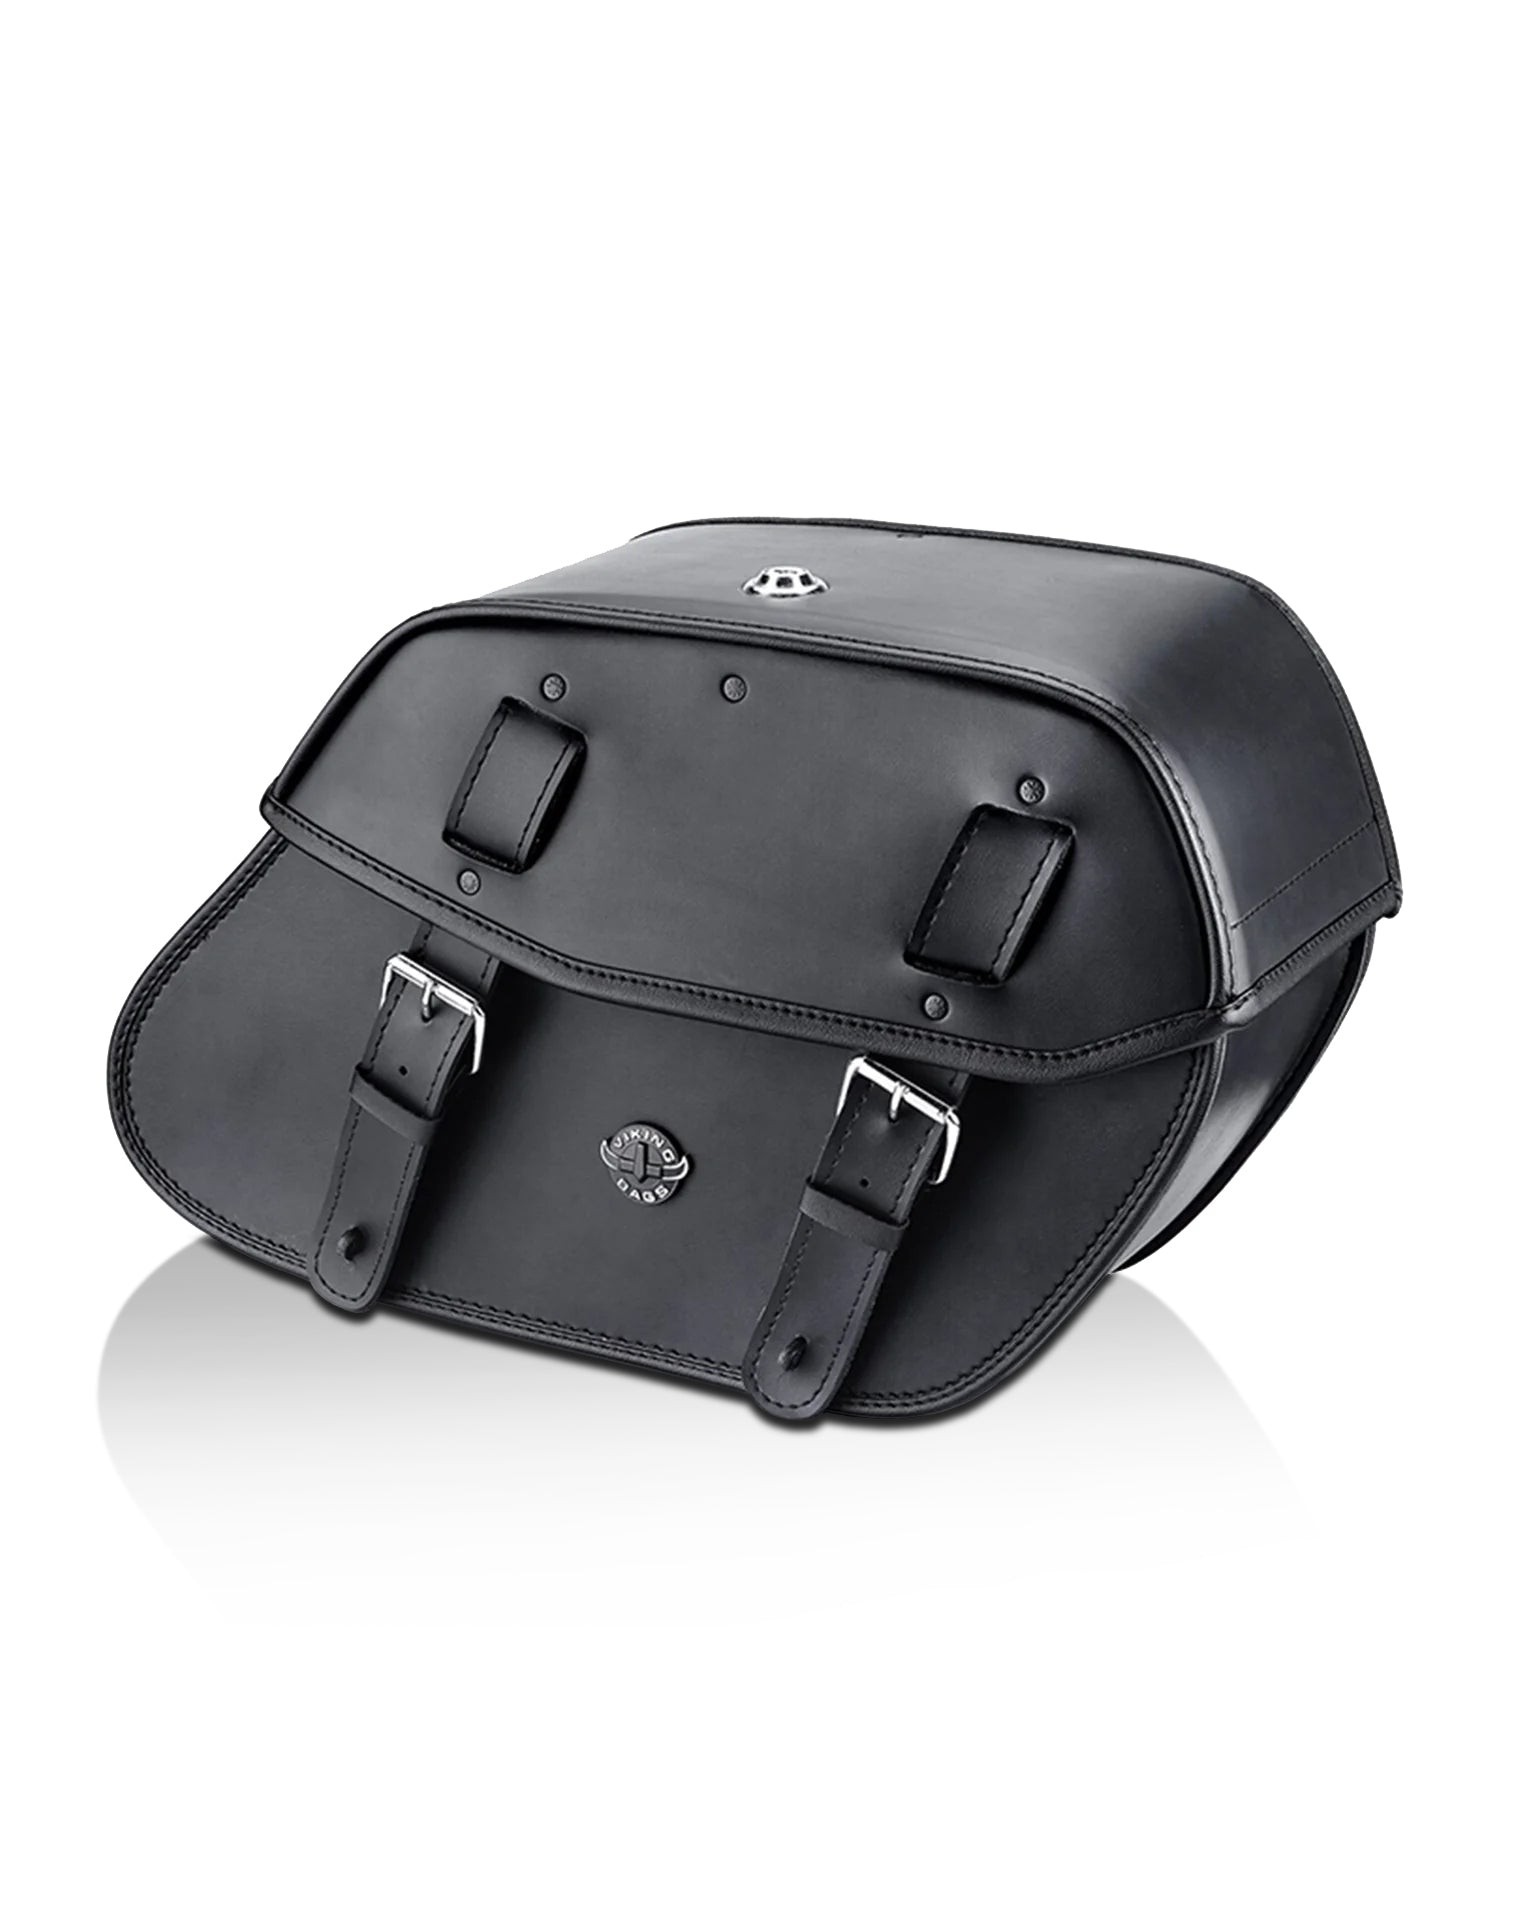 Viking Odin Large Leather Motorcycle Saddlebags For Harley Softail Low Rider S Fxlrs Main View